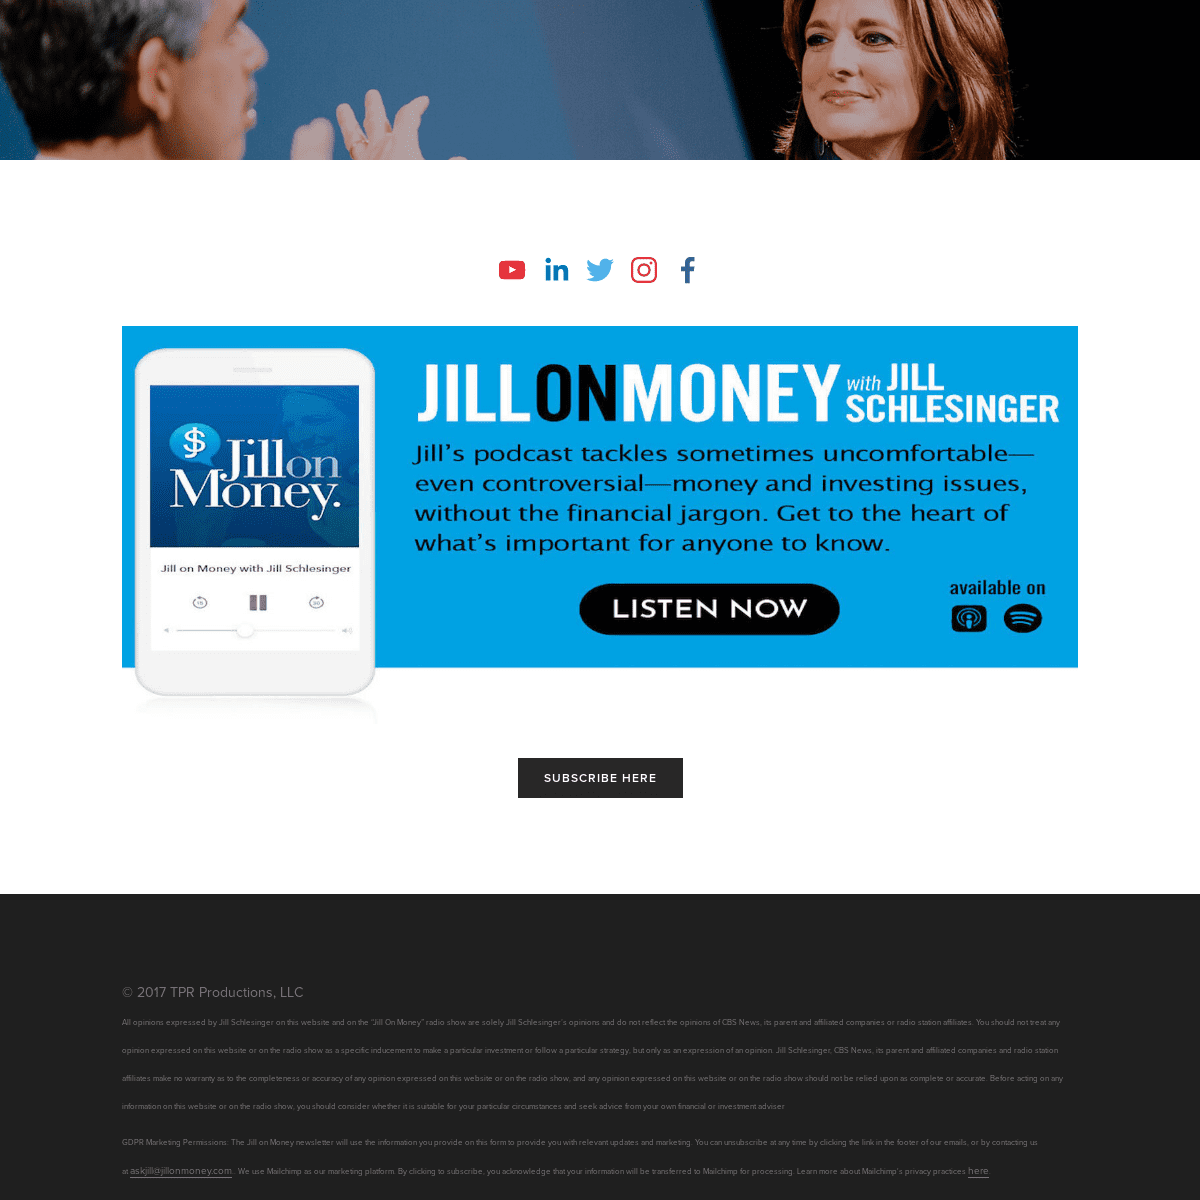 A complete backup of https://jillonmoney.com